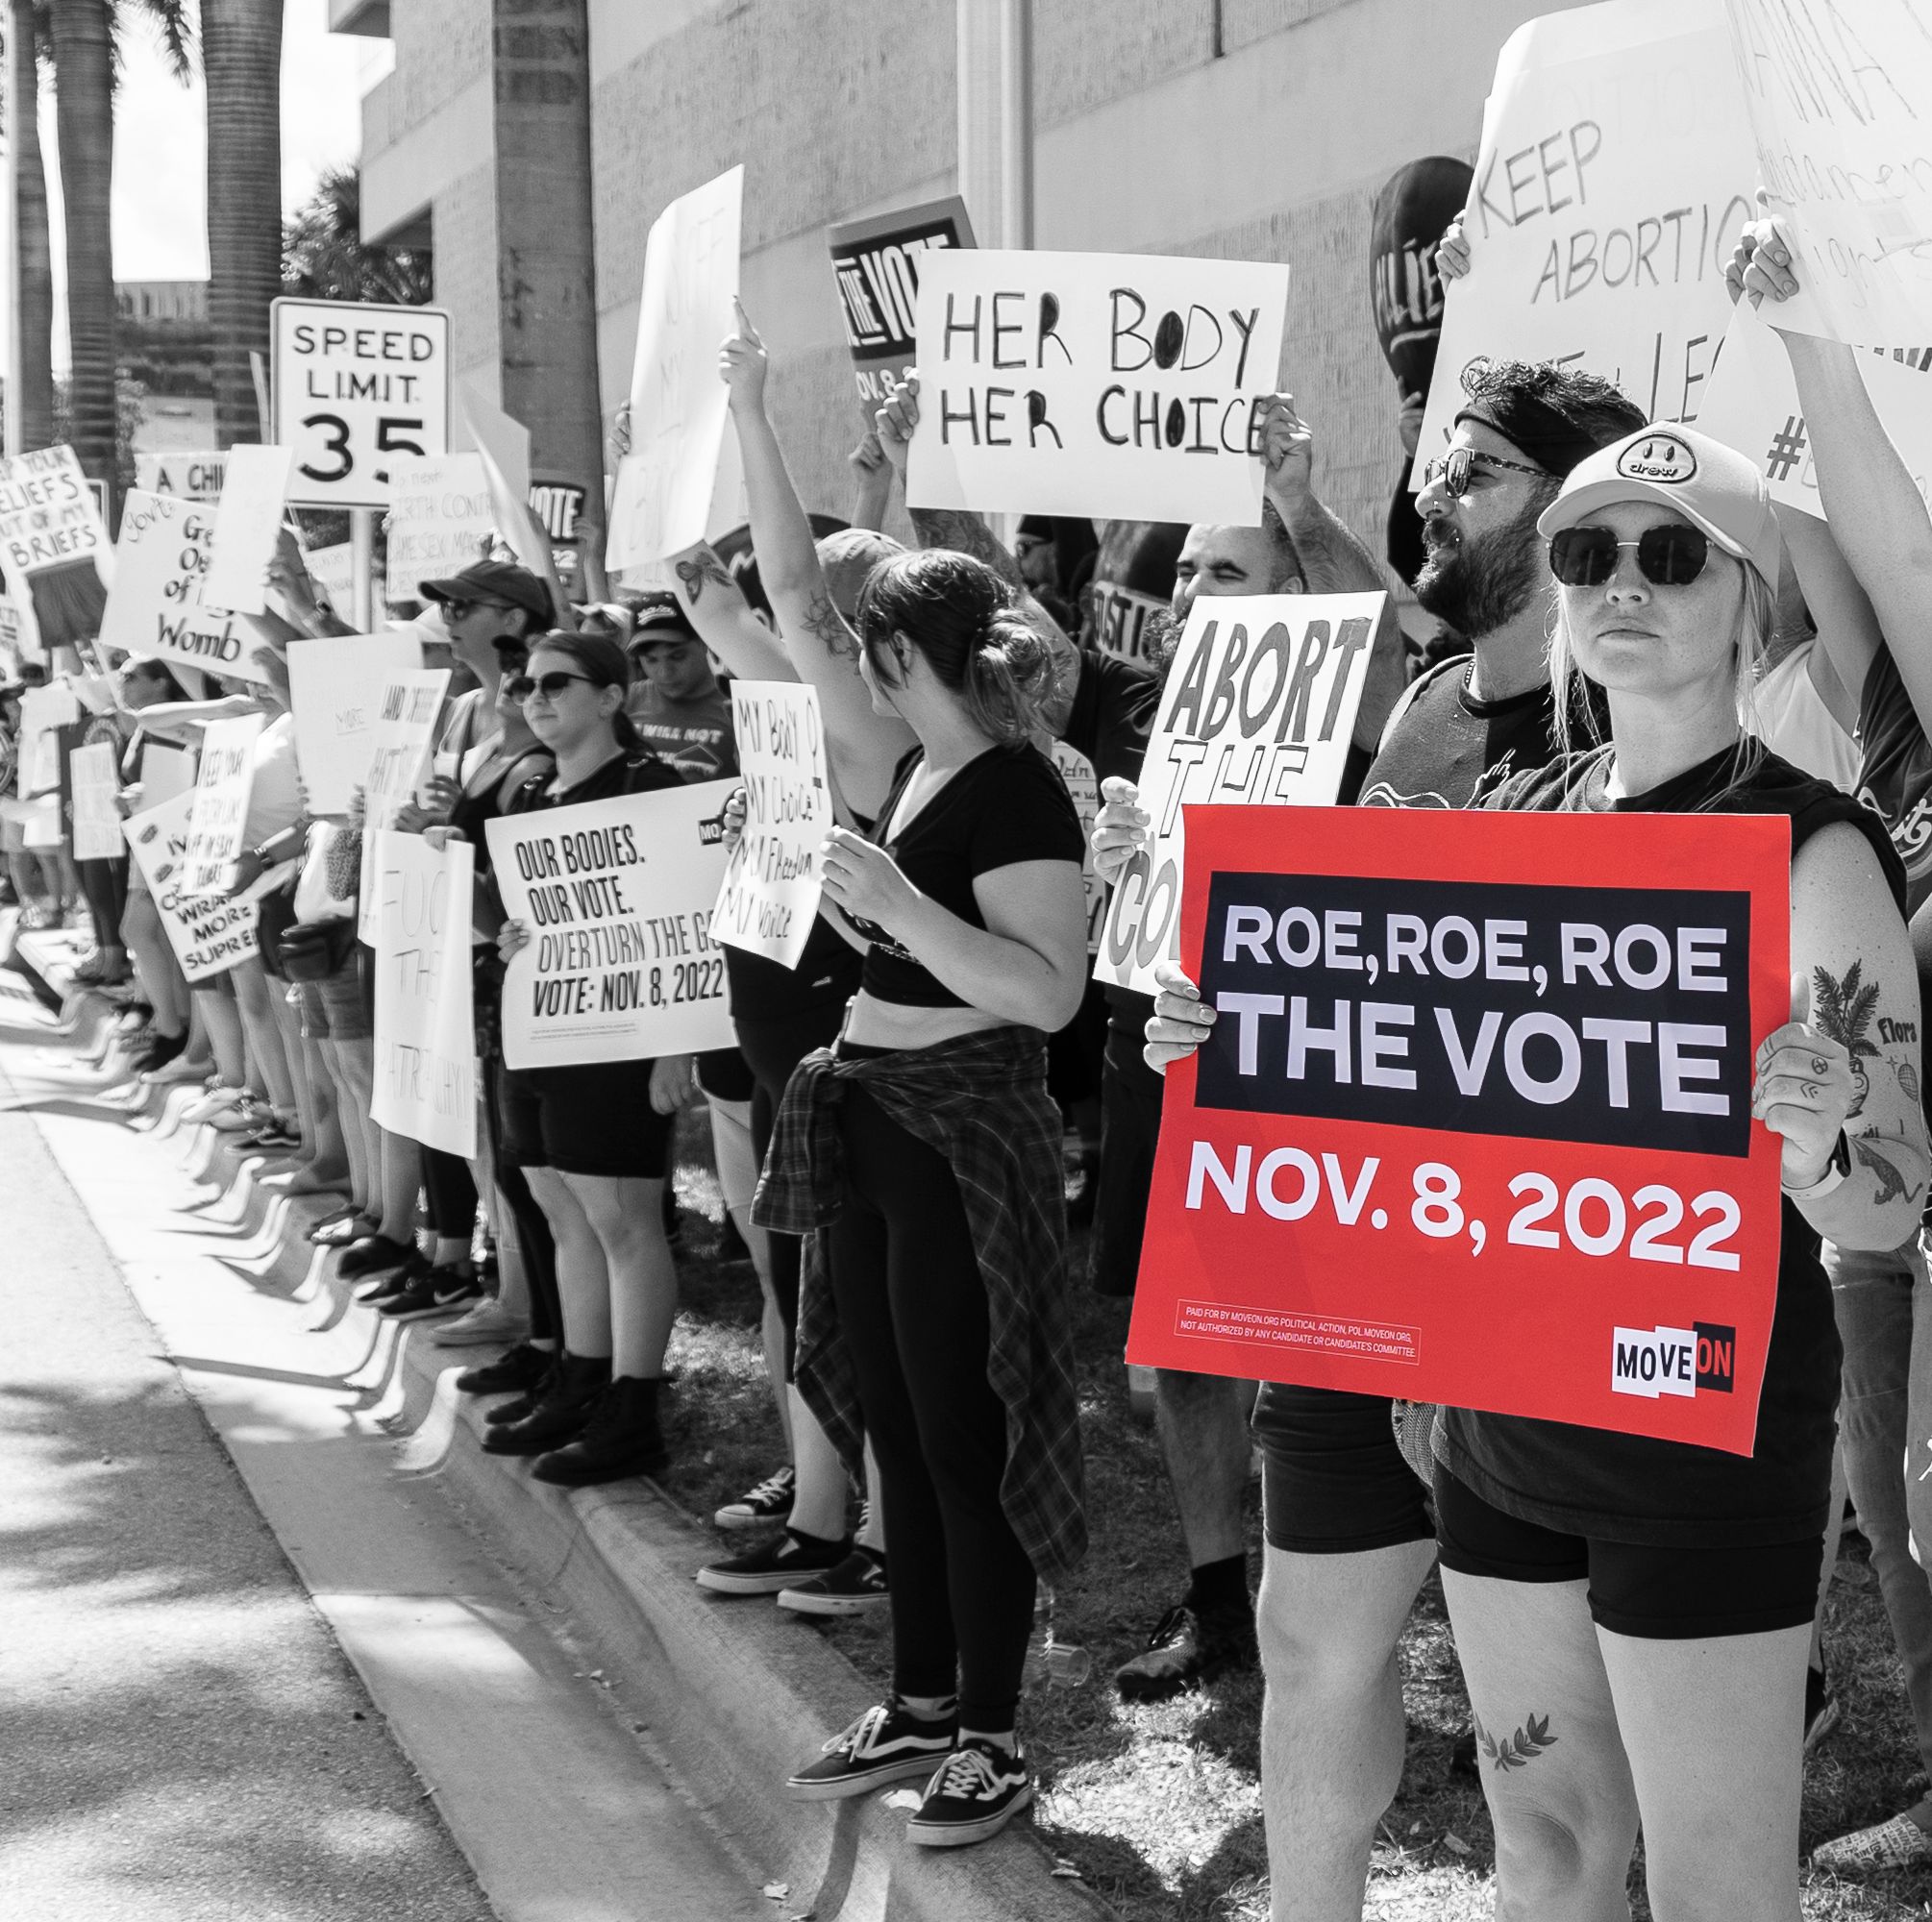 Since the Supreme Court overturned <I>Roe v. Wade </I>in June, eliminating the constitutional right to abortion and sending the issue back to the states, pro-abortion rights politicians and activists have been urging supporters to do one thing: vote in the midterms this November. Nearly 21 million women in the U.S. have already lost access to almost all elective abortions in their home states, per <I>The Washington Post</I>, and the elections this fall will be crucial in determining the future of reproductive rights across the country.

<br><br>“One of the things the fall of <I>Roe</I> has done is reminded people that we need to be paying attention to races at all levels,” A’shanti Gholar, the president of Emerge, an organization dedicated to recruiting and training Democratic women to run for political office, told ELLE.com. “Right now we need a full-fledged effort from all offices to protect abortion rights.”

<br><br>At the federal level, in order for any hope of codifying Roe and preventing Republicans from passing a nationwide abortion ban as some have threatened, Democrats would need to keep control of the U.S. House and expand their majority in the U.S. Senate. Advocates are also hoping to elect representatives who reflect the lived experiences of those affected by abortion care. “If we are having this conversation about women’s health care, we need to make sure we have a Black woman’s voice in the Senate to be a part of it,” Gholar said. Abortion restrictions disproportionately impact people of color, and as of now, there are no Black women and only three women of color in the U.S. Senate.